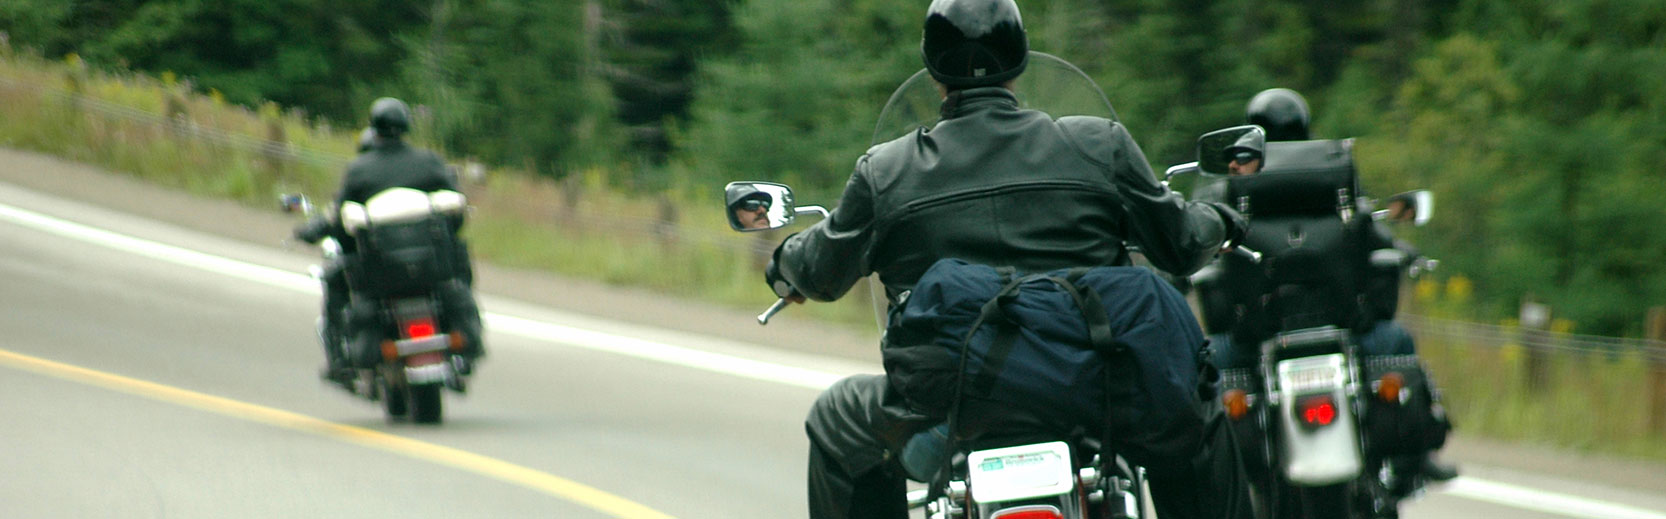 Motorcycle riders using safety precautions when going on a group ride